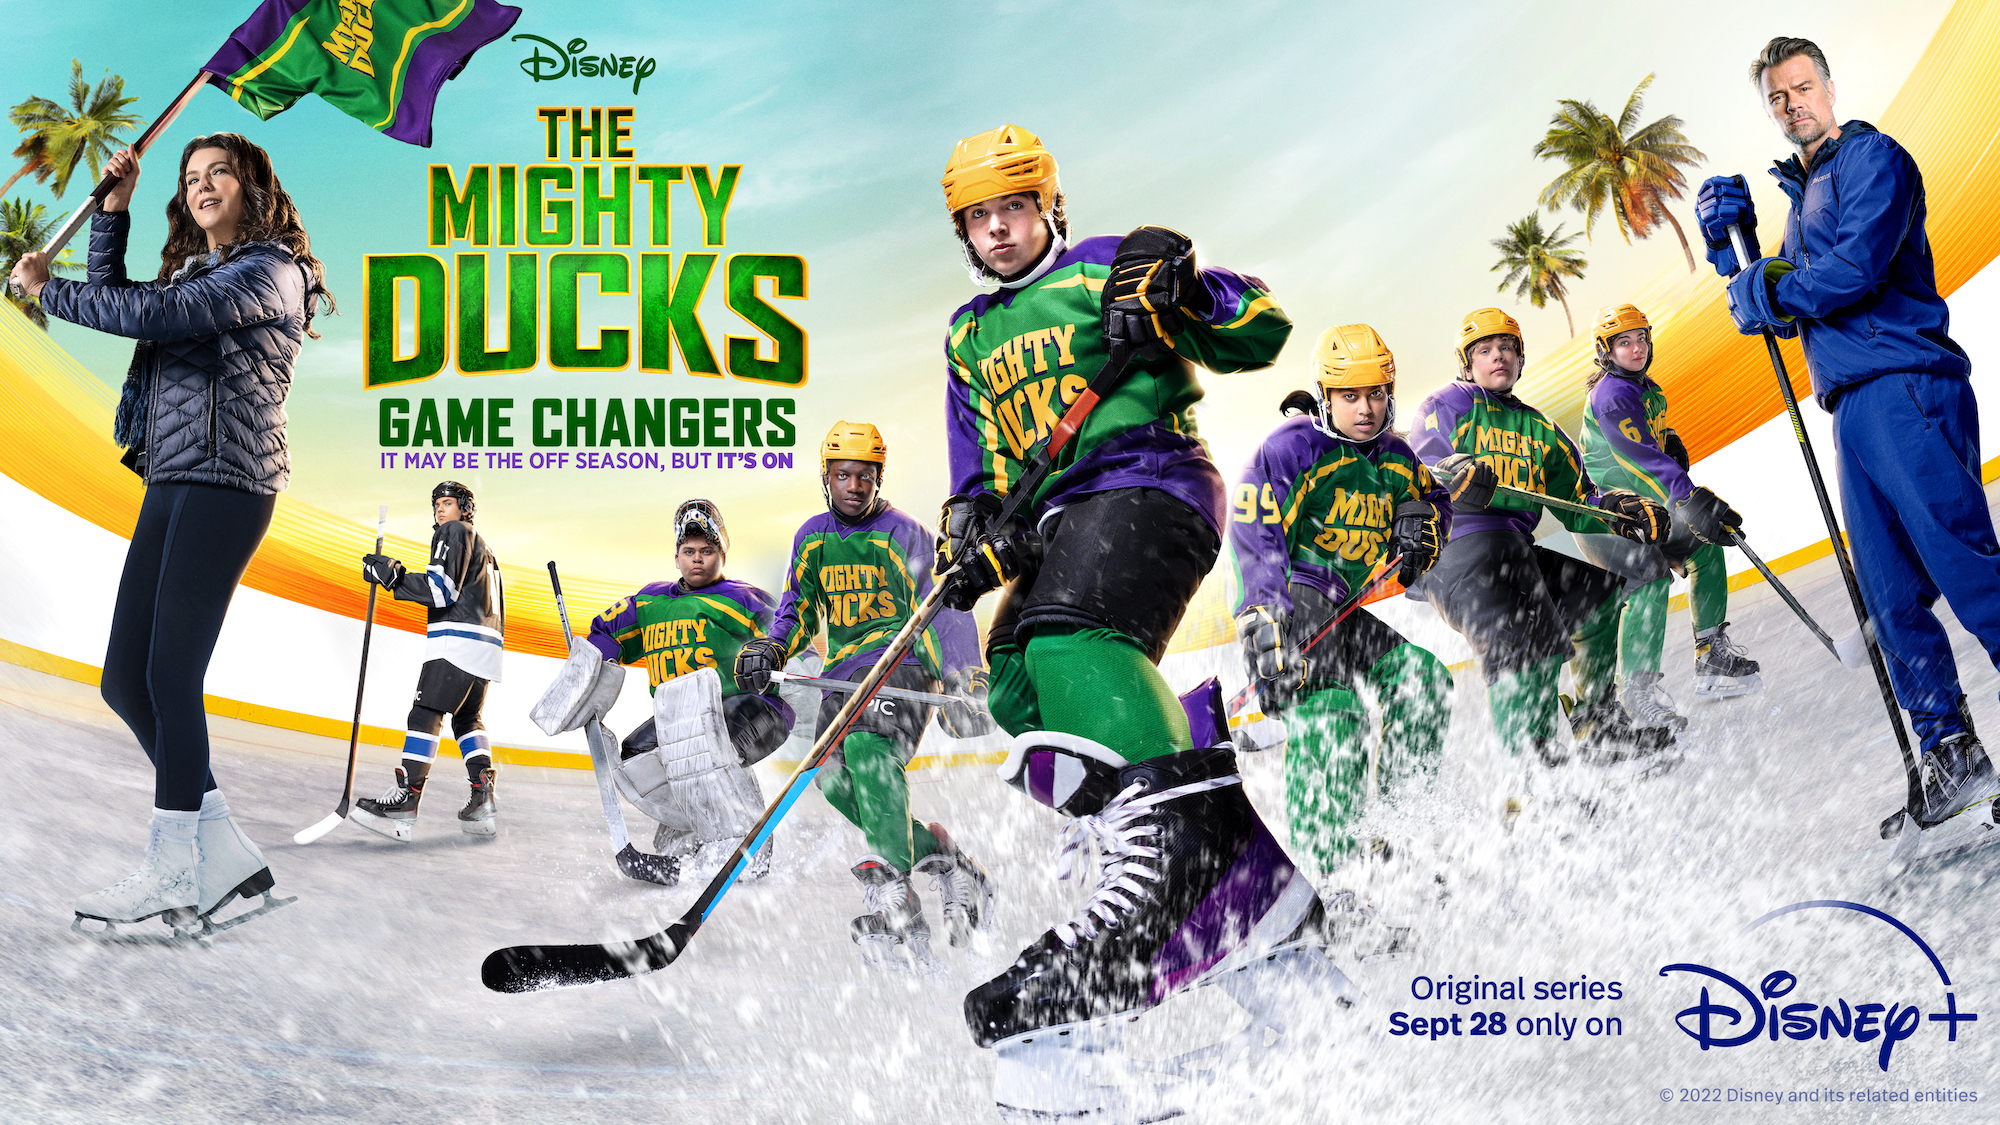 The Mighty Ducks Game Changers cast: Who is in the cast of The